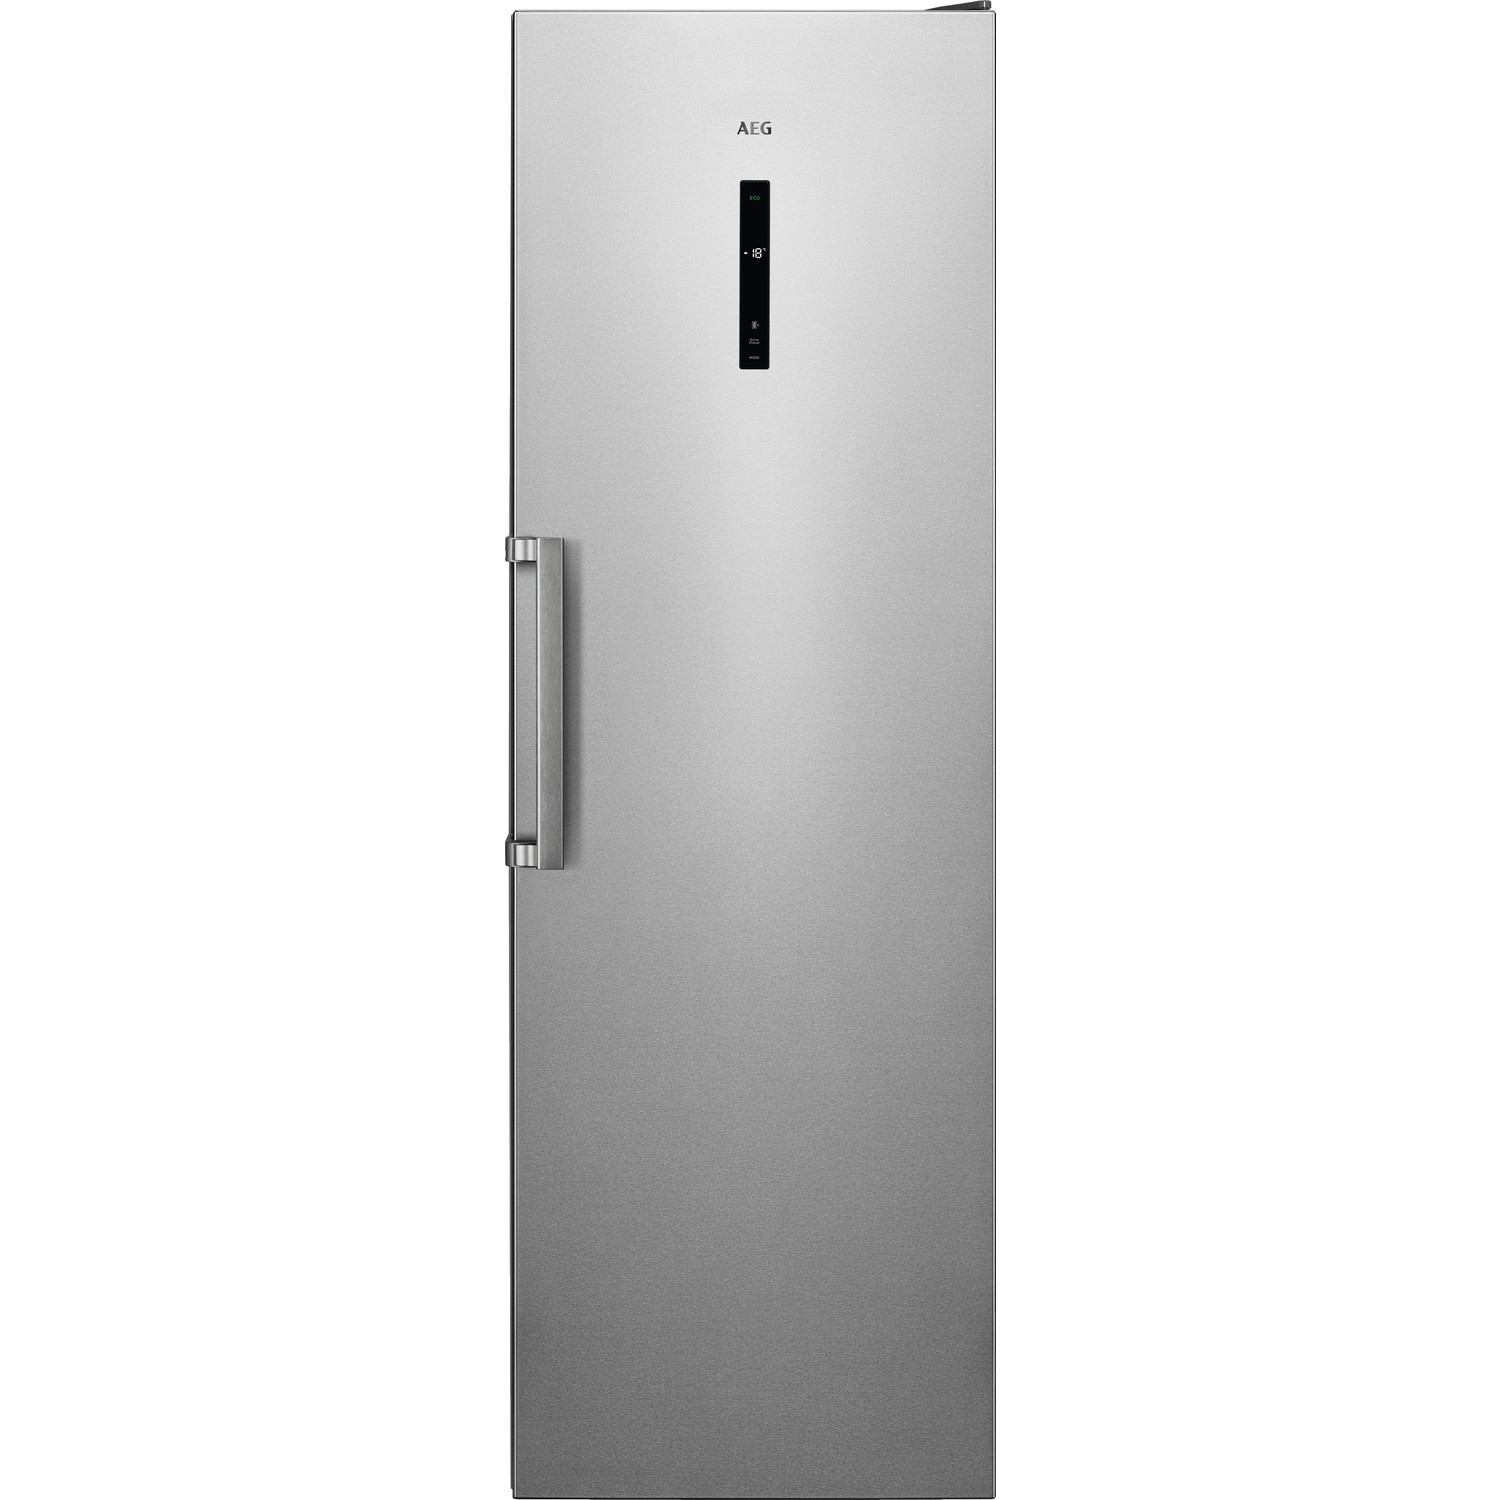 Refurbished AEG AGB728E5NX Freestanding 280 Litre Frost Free Freezer Stainless Steel